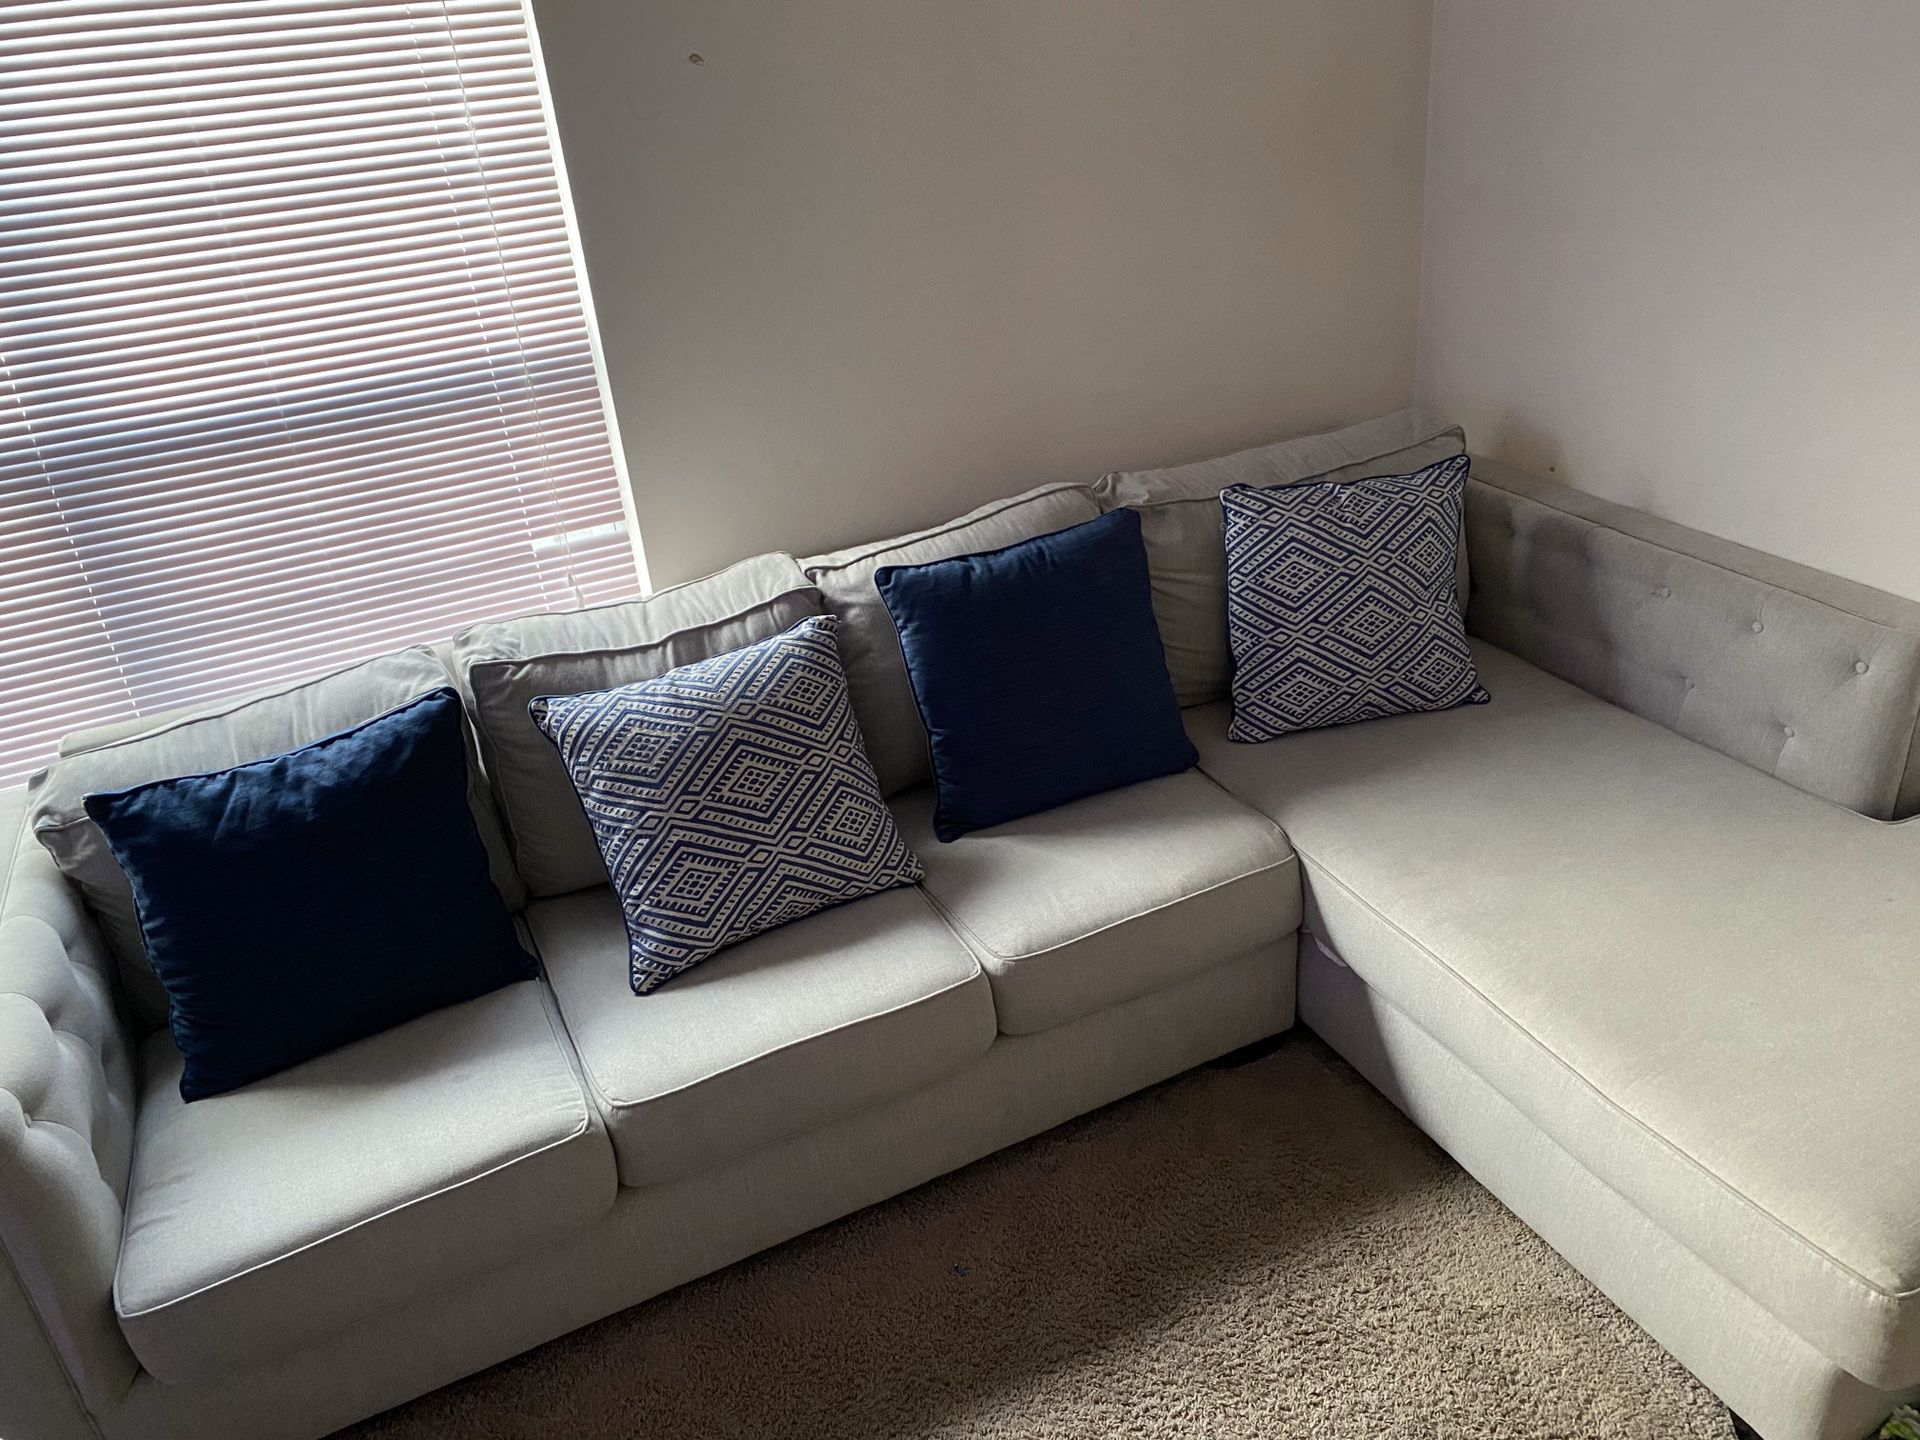 Sectional couch excellent condition $600